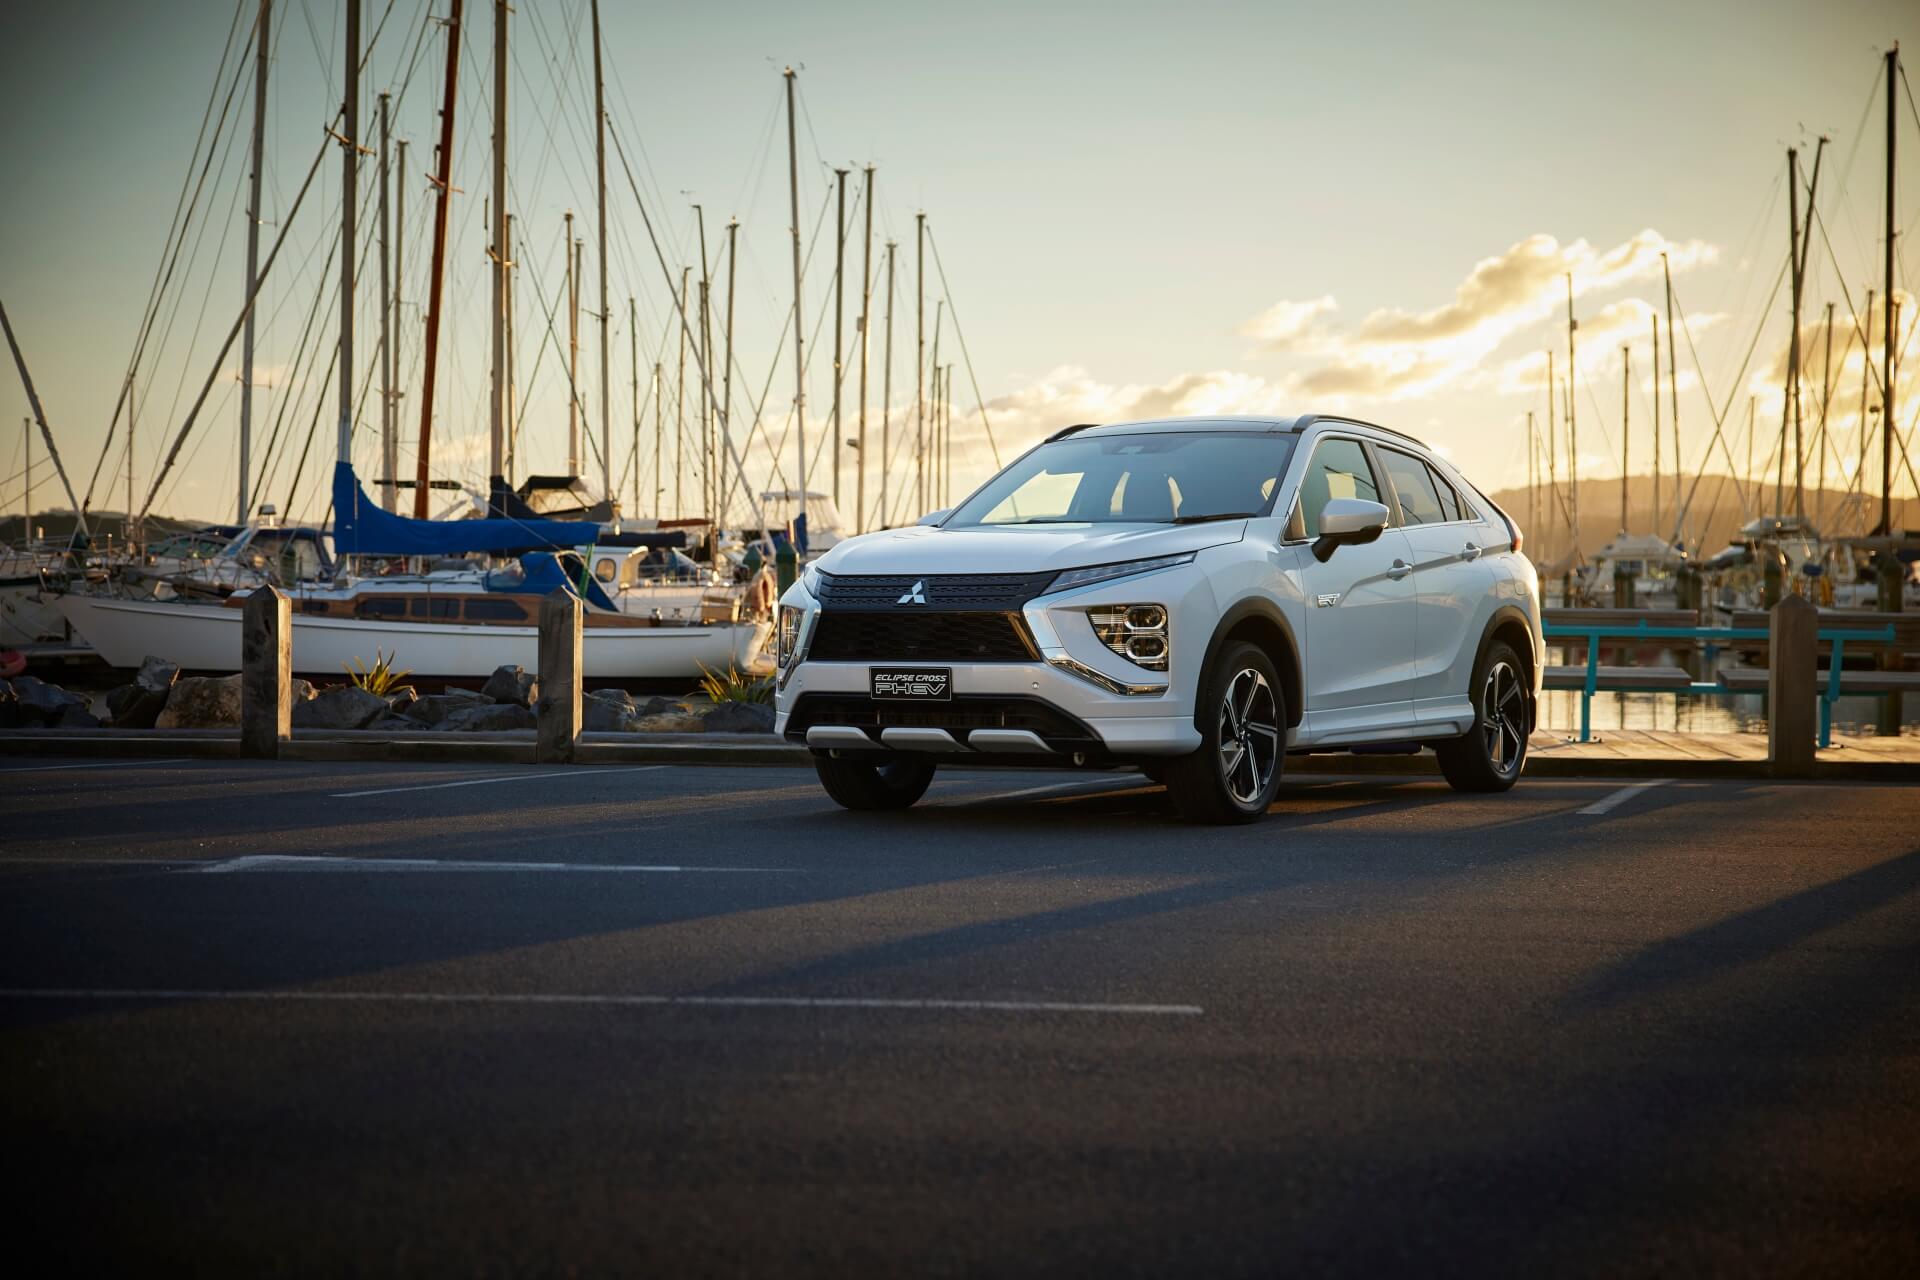 A Mitsubishi Eclipse Cross parked in the City of Sails